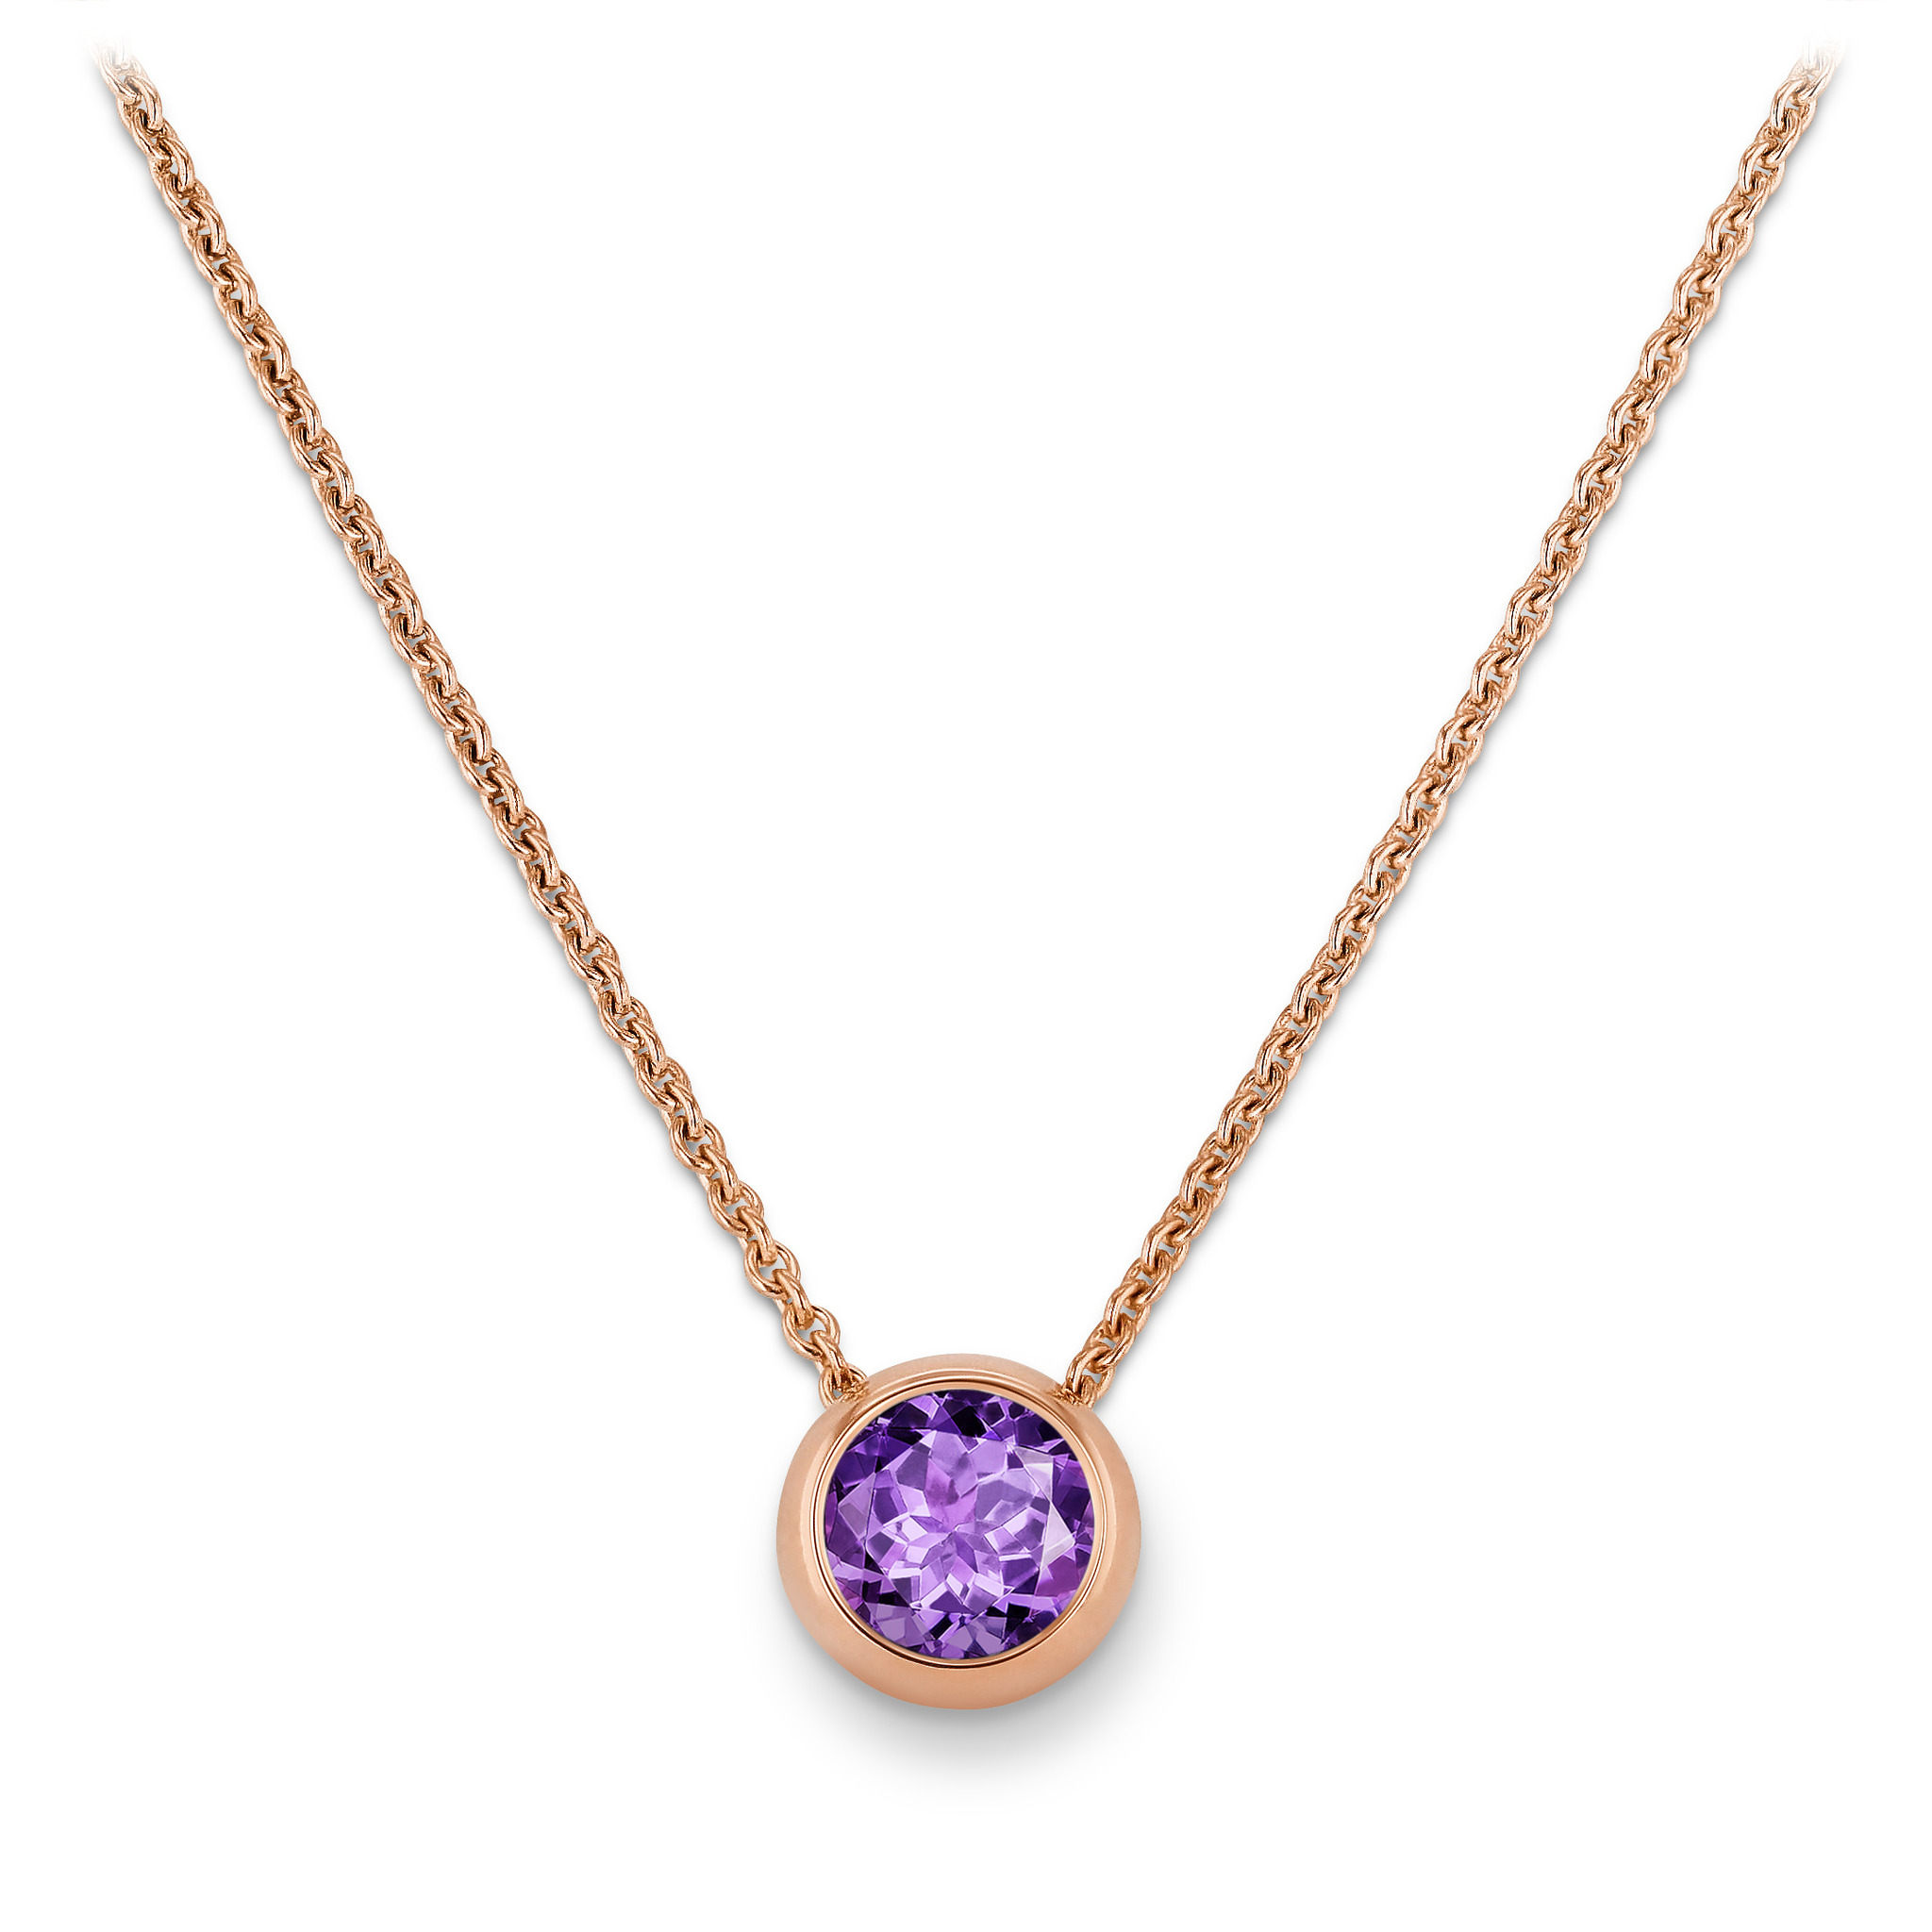 Necklace with amethyst